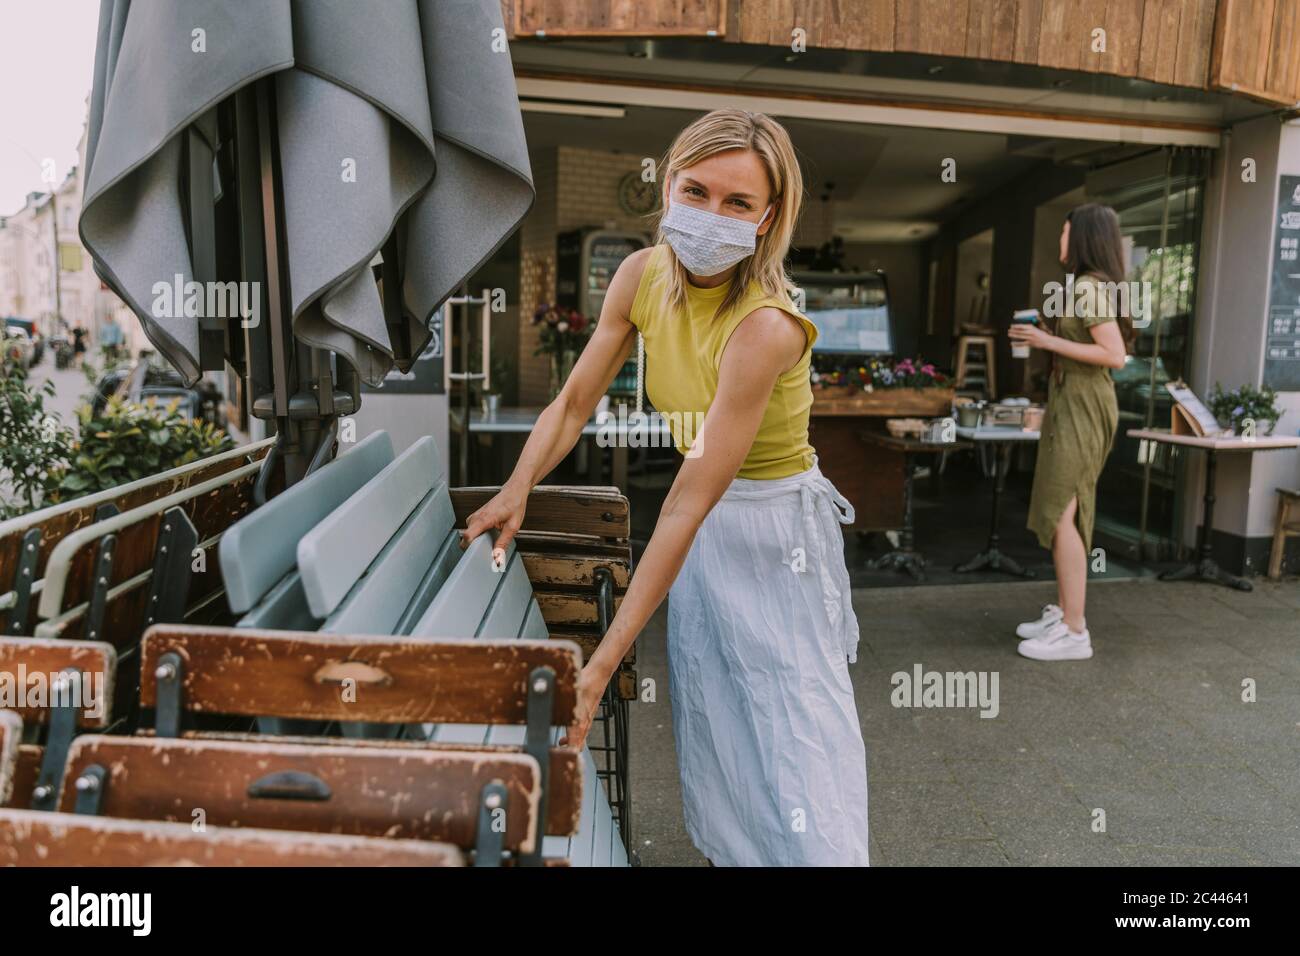 Cafe owner wearing face mask putting up tables and chairs Stock Photo